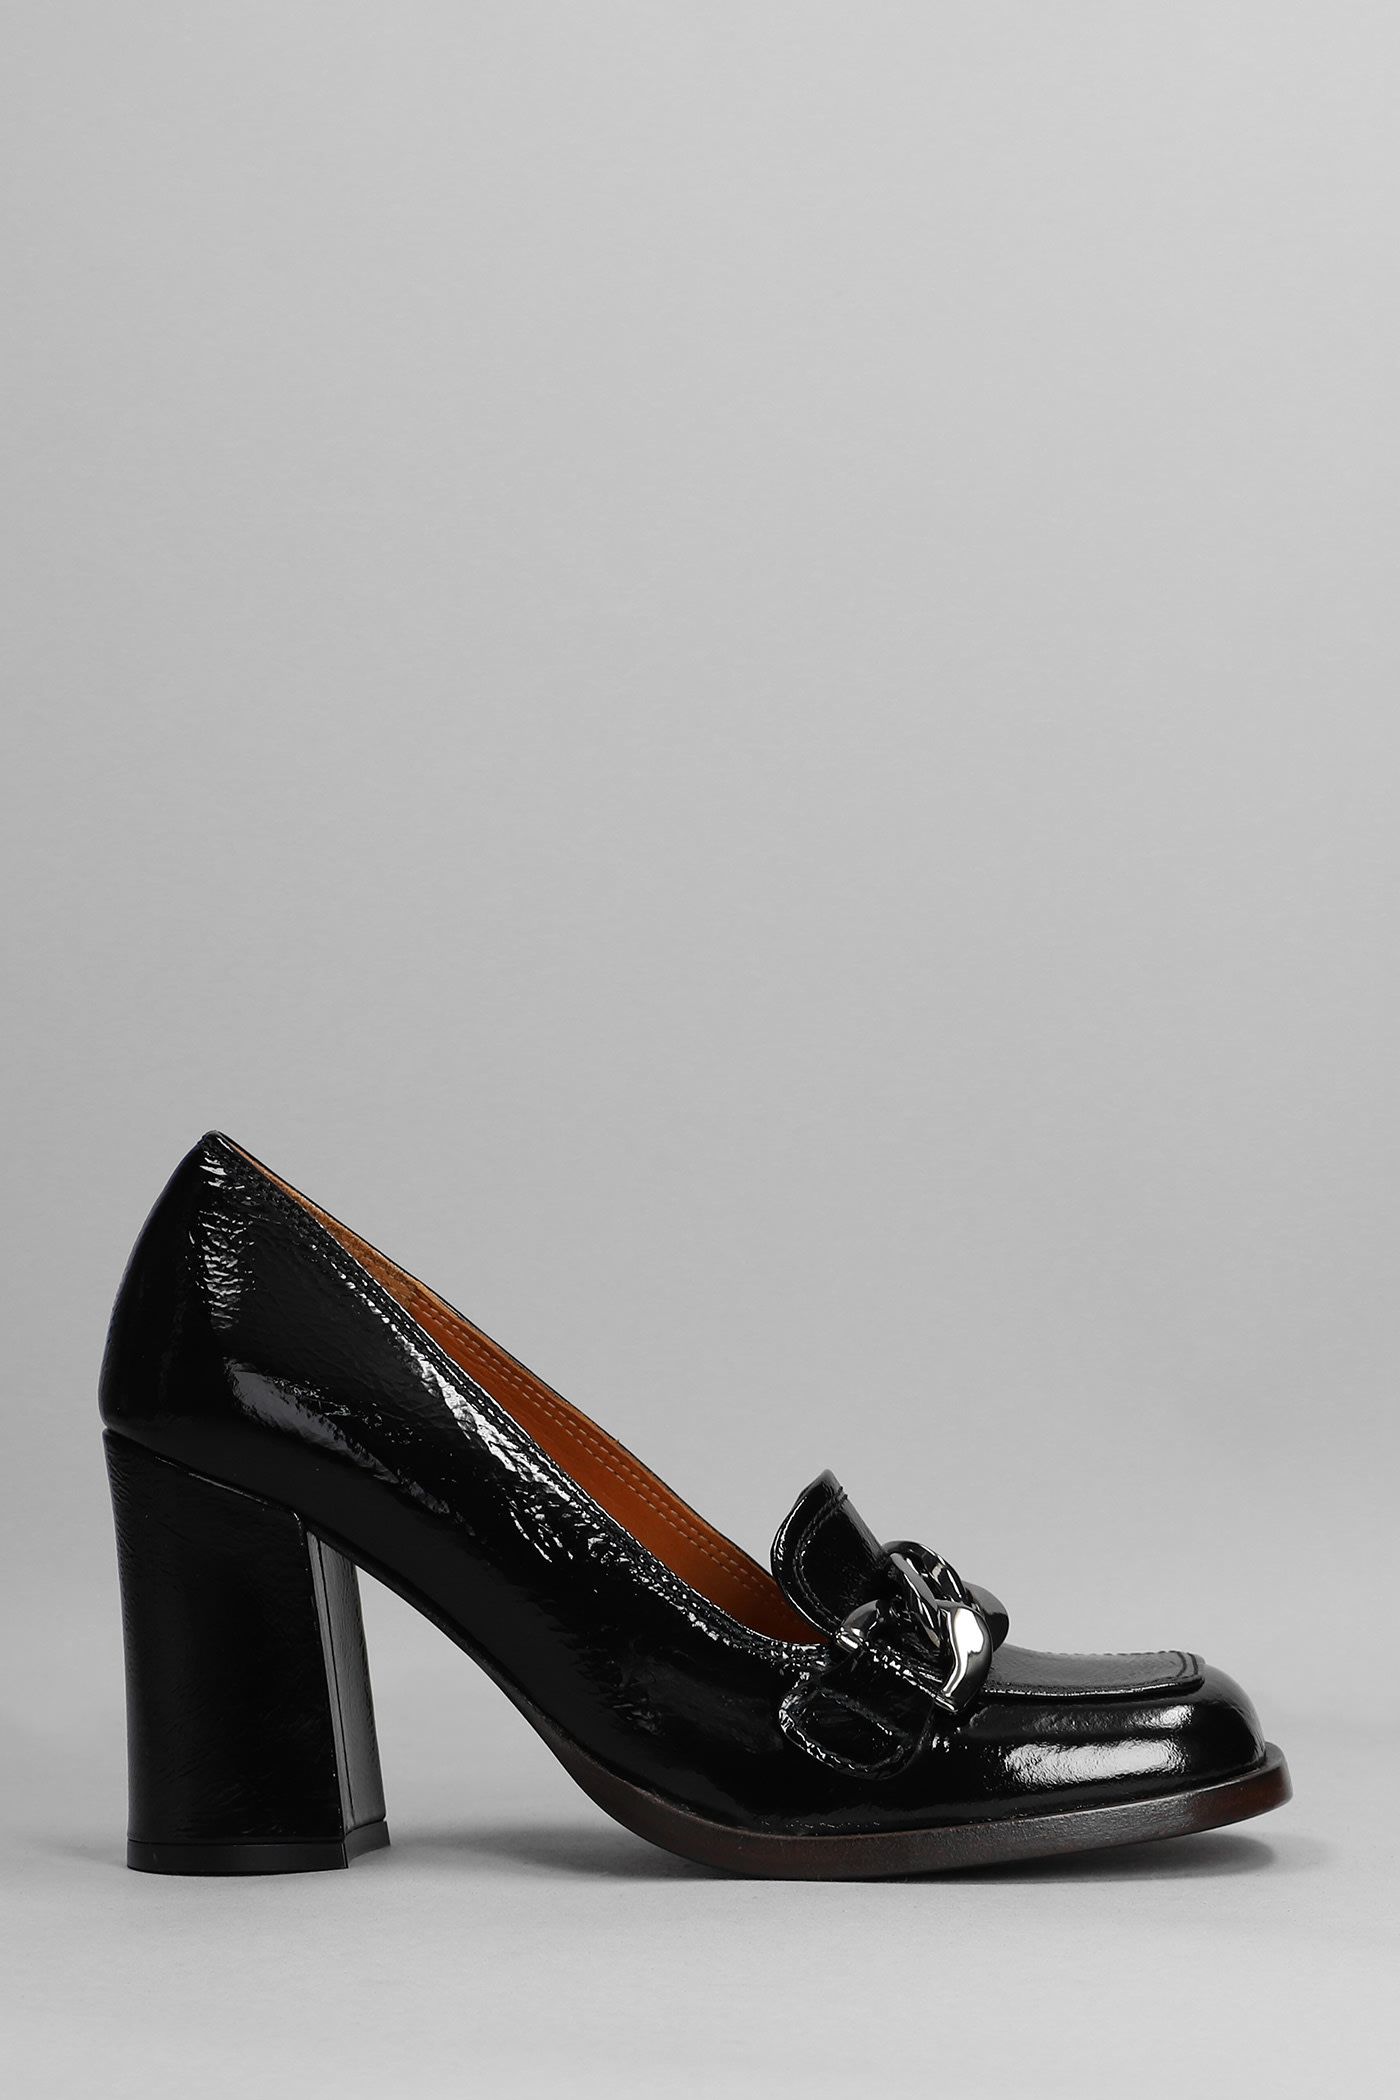 Chie Mihara Xanco Pumps In Black Leather